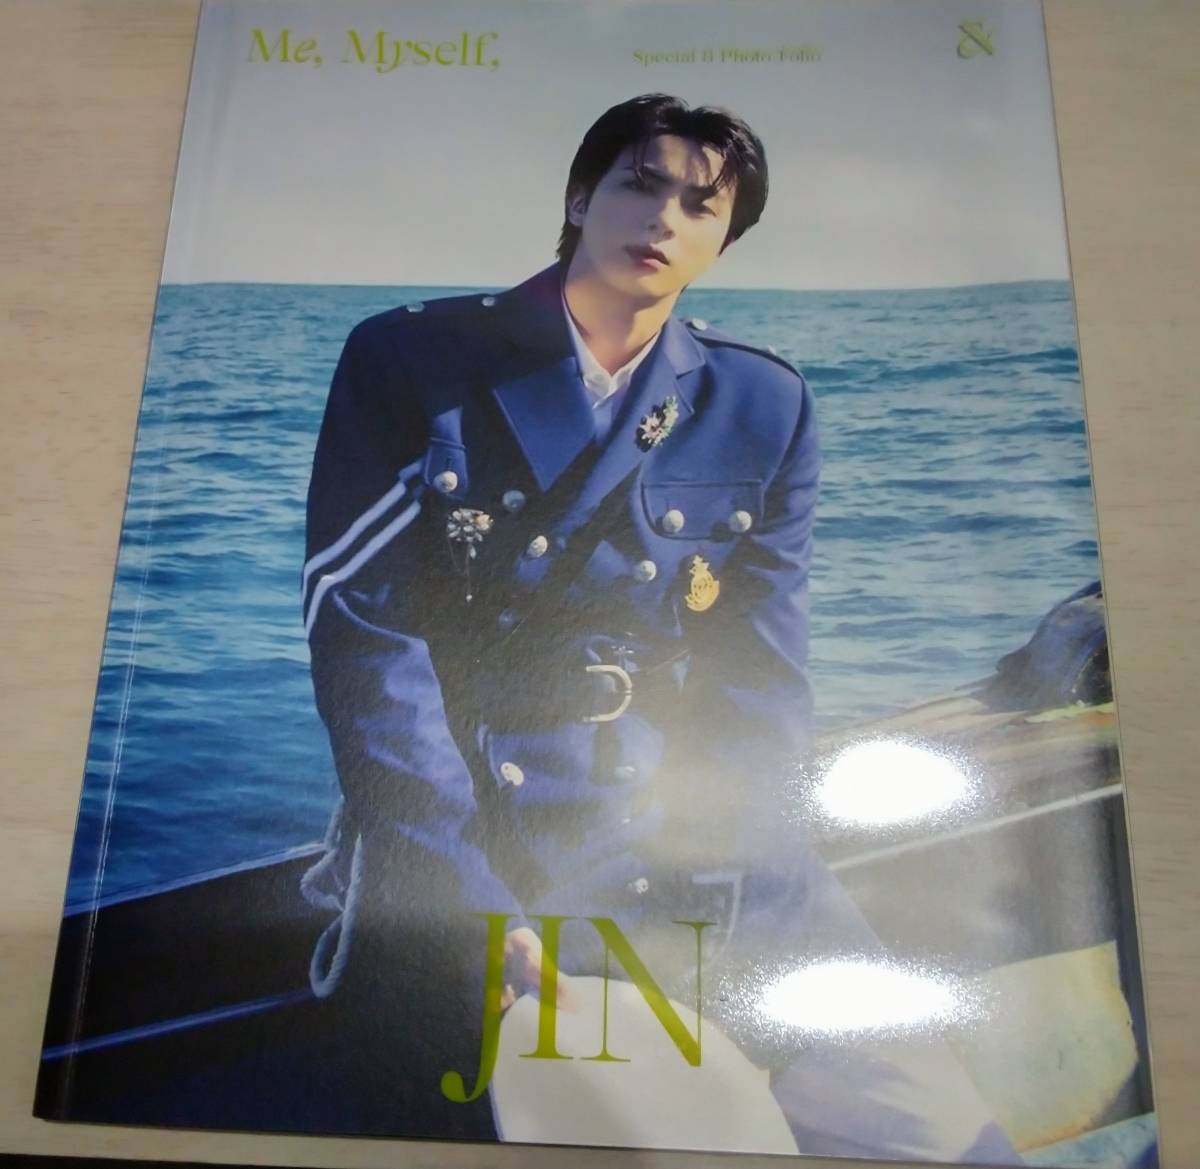 BTS　「JIN」　写真集　Special 8 Photo-Folio 「Me Myself and Jin Sea of JIN island」　公式　フォトブック　ソロ　ジン　ソクジン_画像1